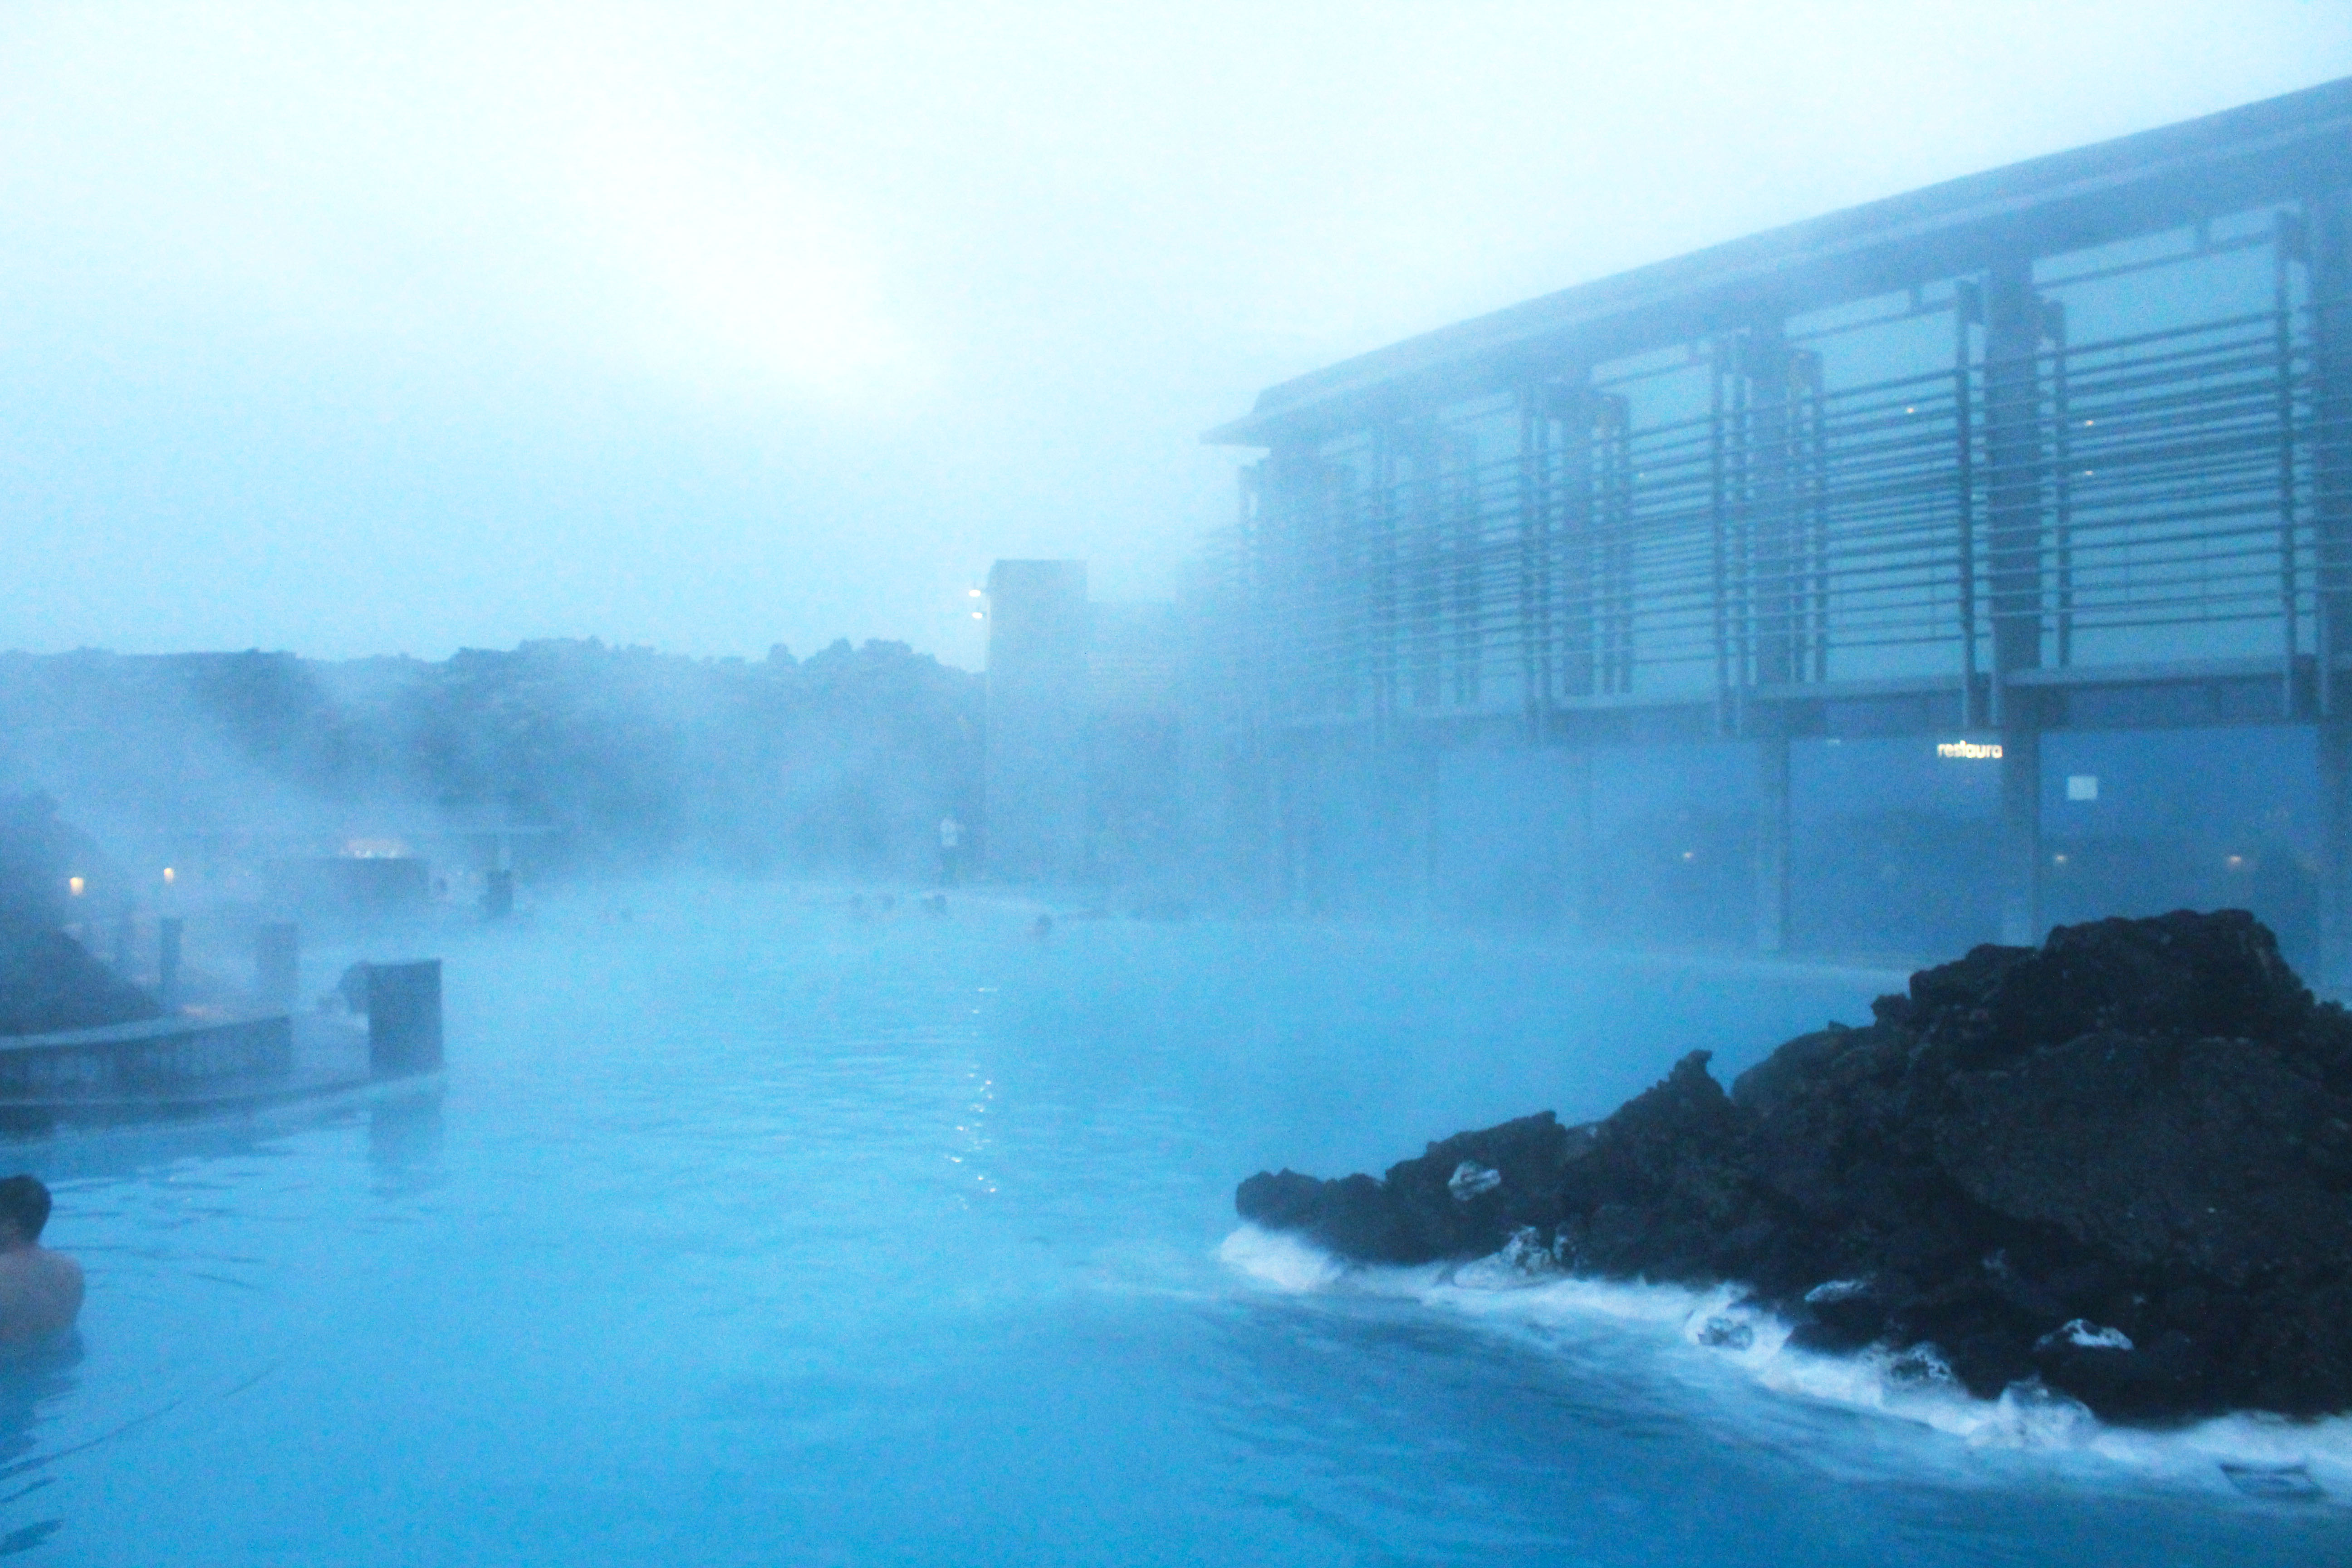 Iceland's Blue Lagoon and Golden Circle